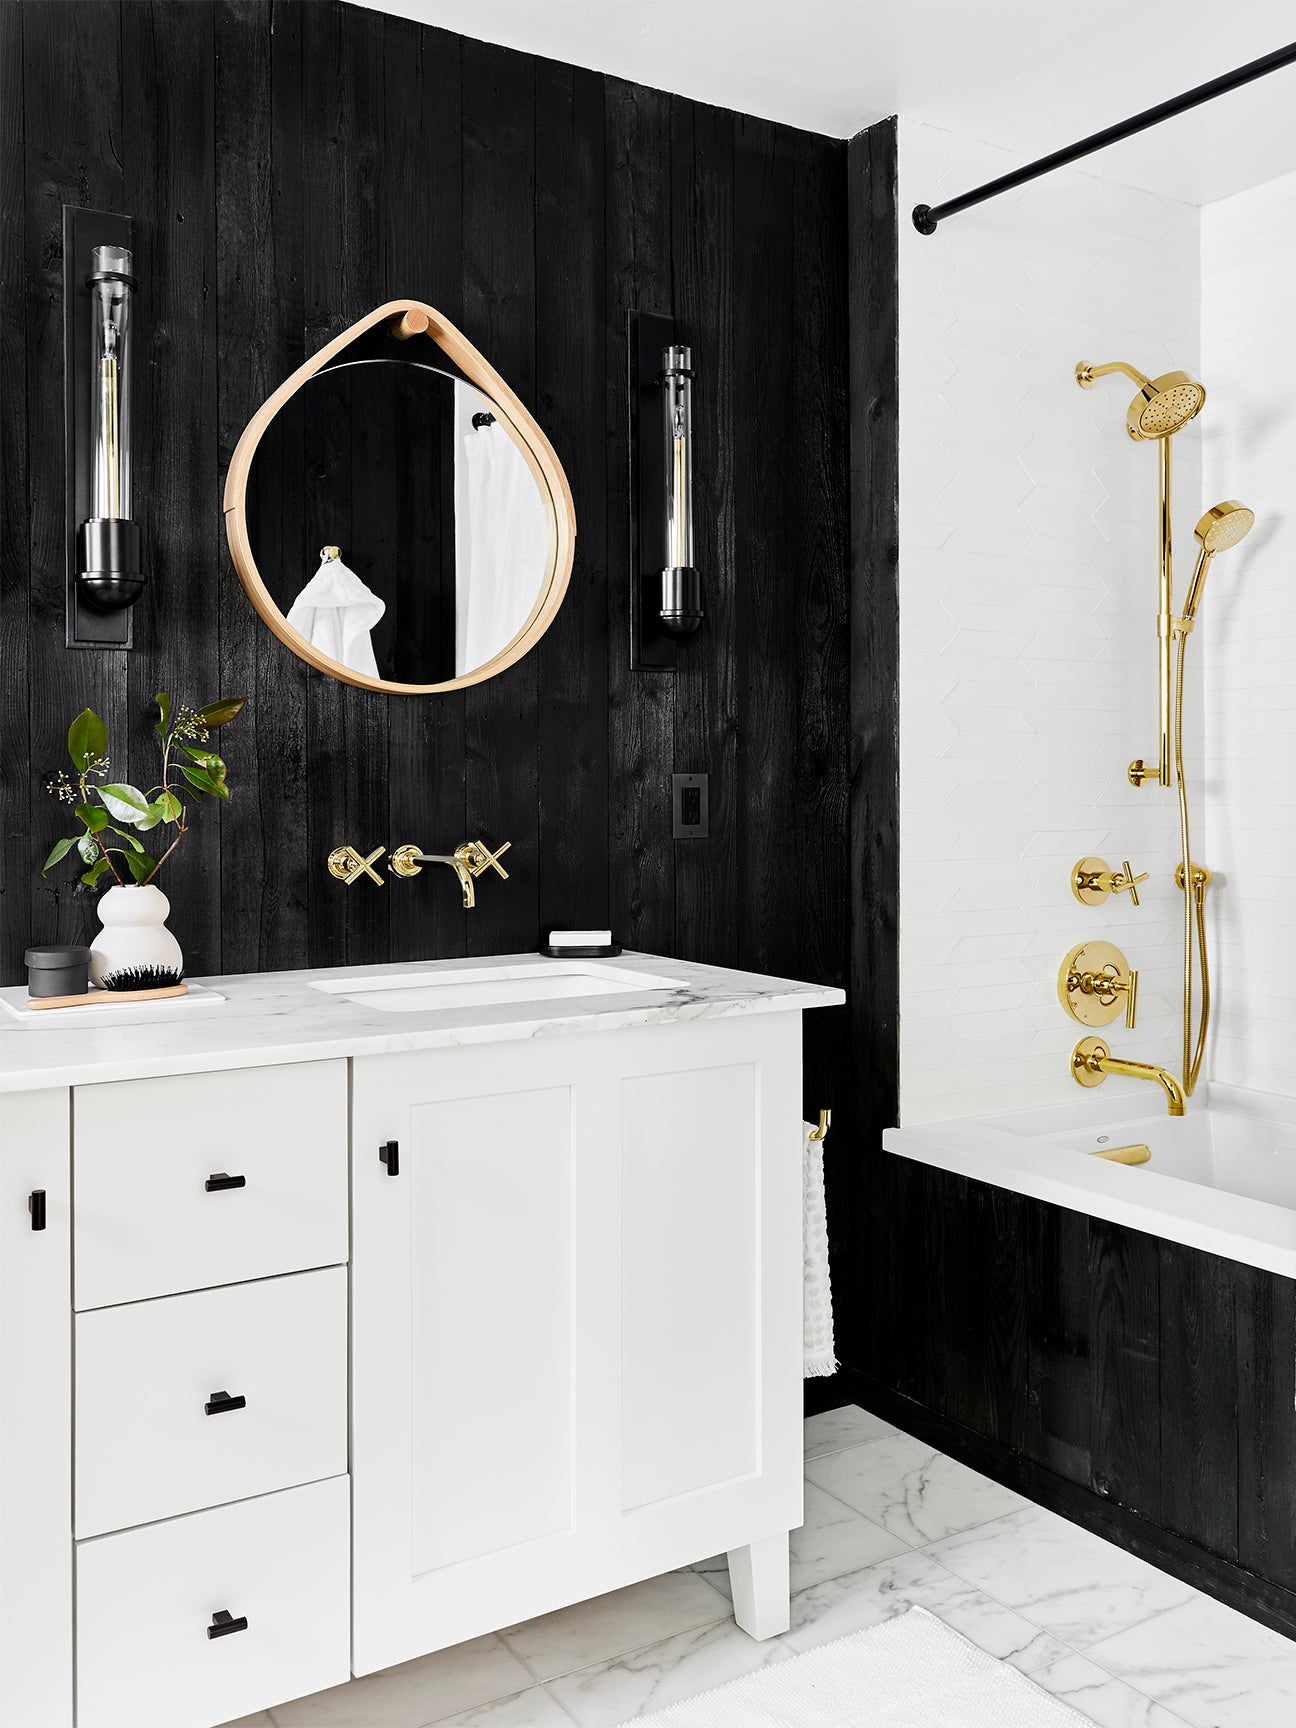 Black bathroom with gold accents